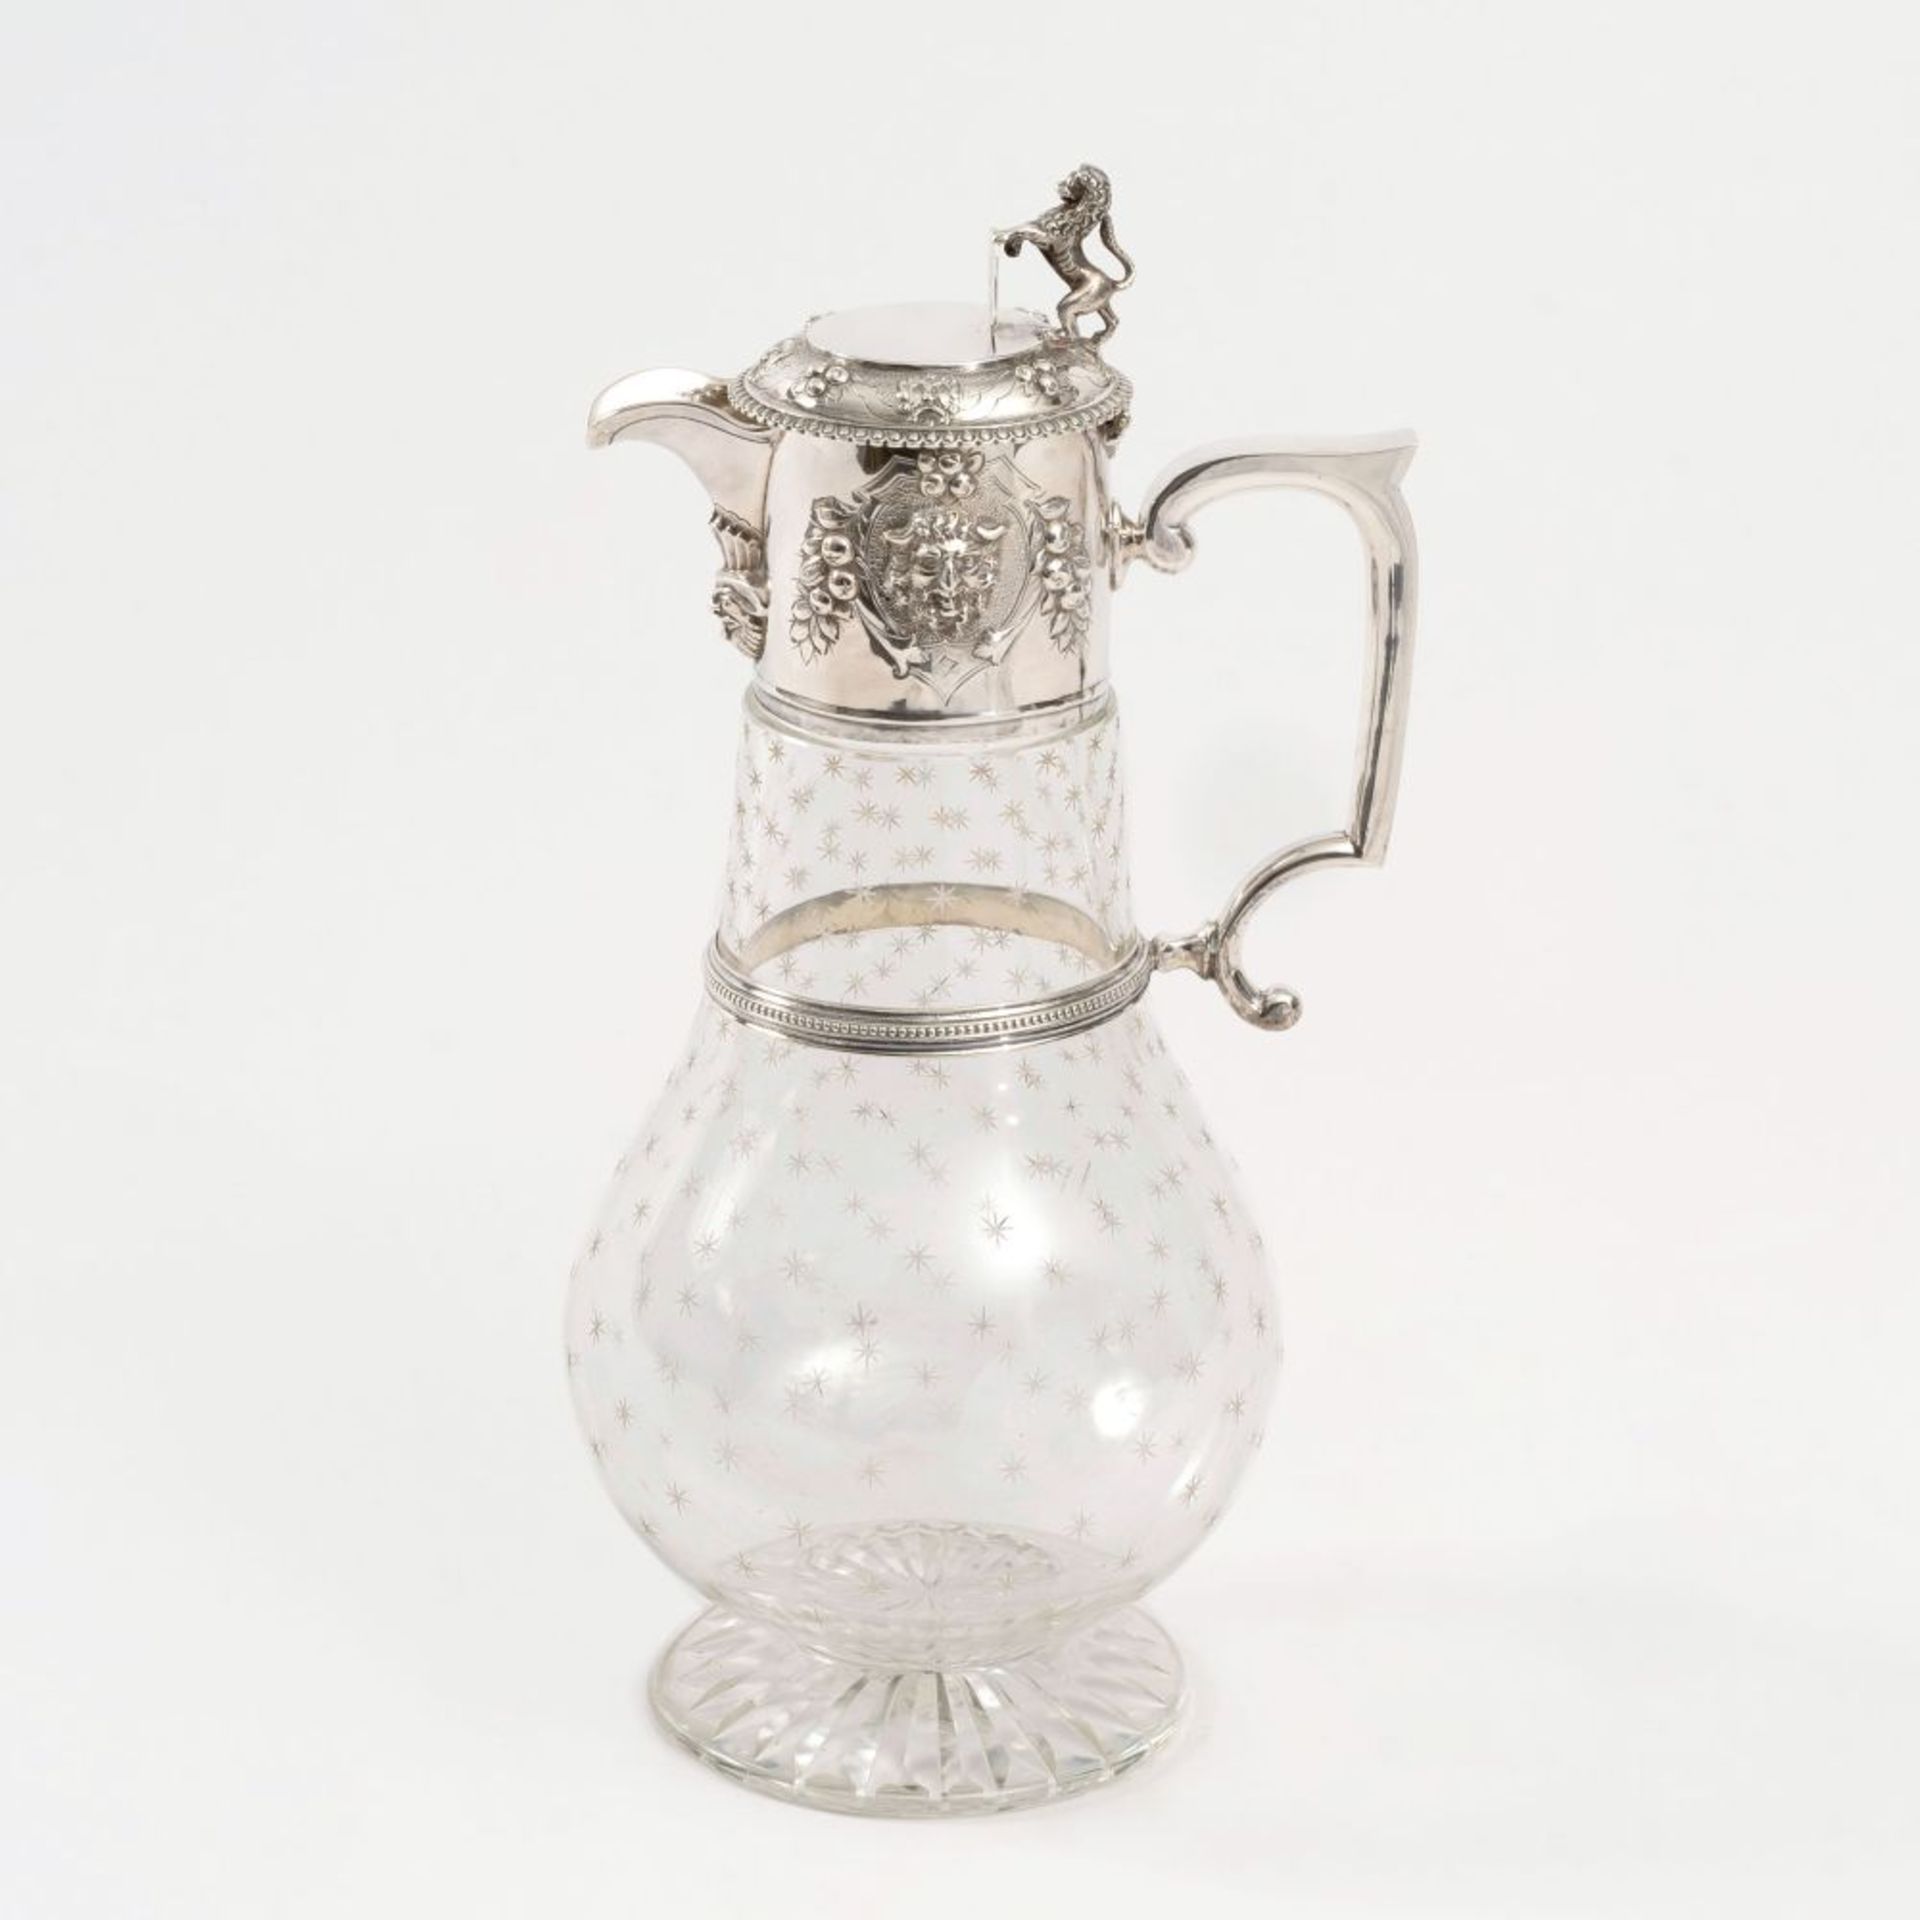 Figg, John Wilmin London, reg. 1834. A Crystal Claret Jug with Silver Mounting.